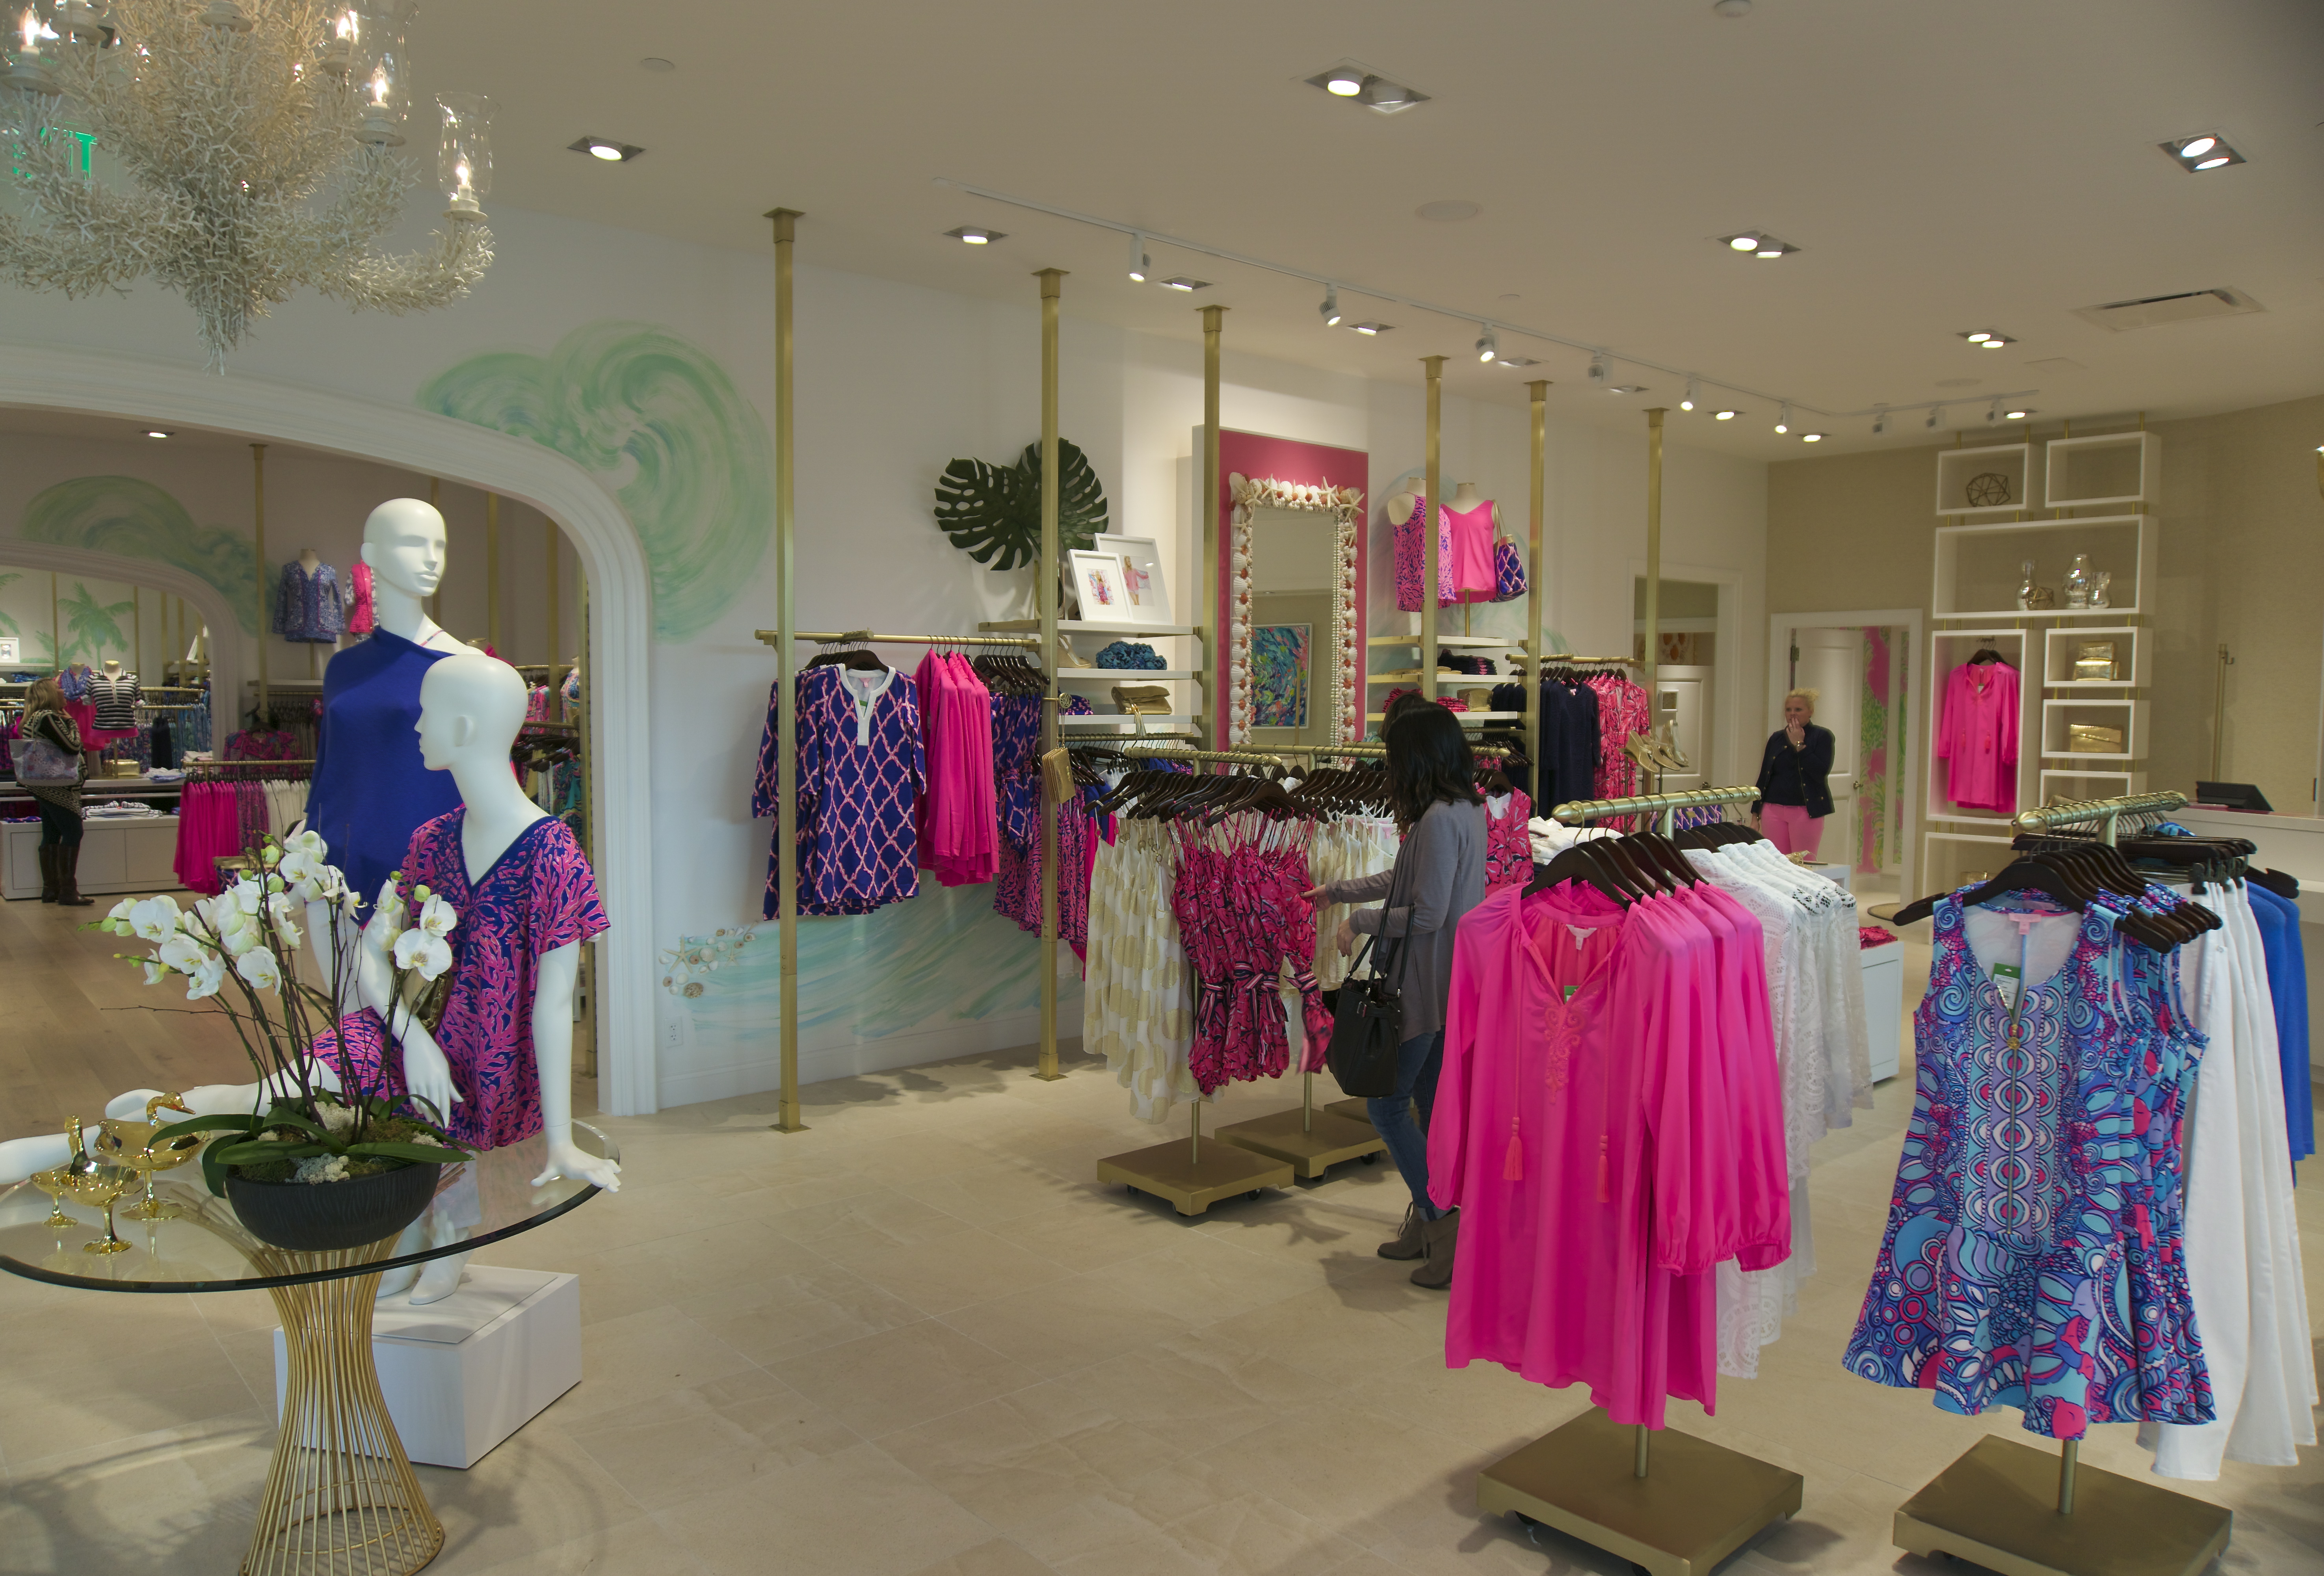 Lilly Pulitzer King of Prussia store tour